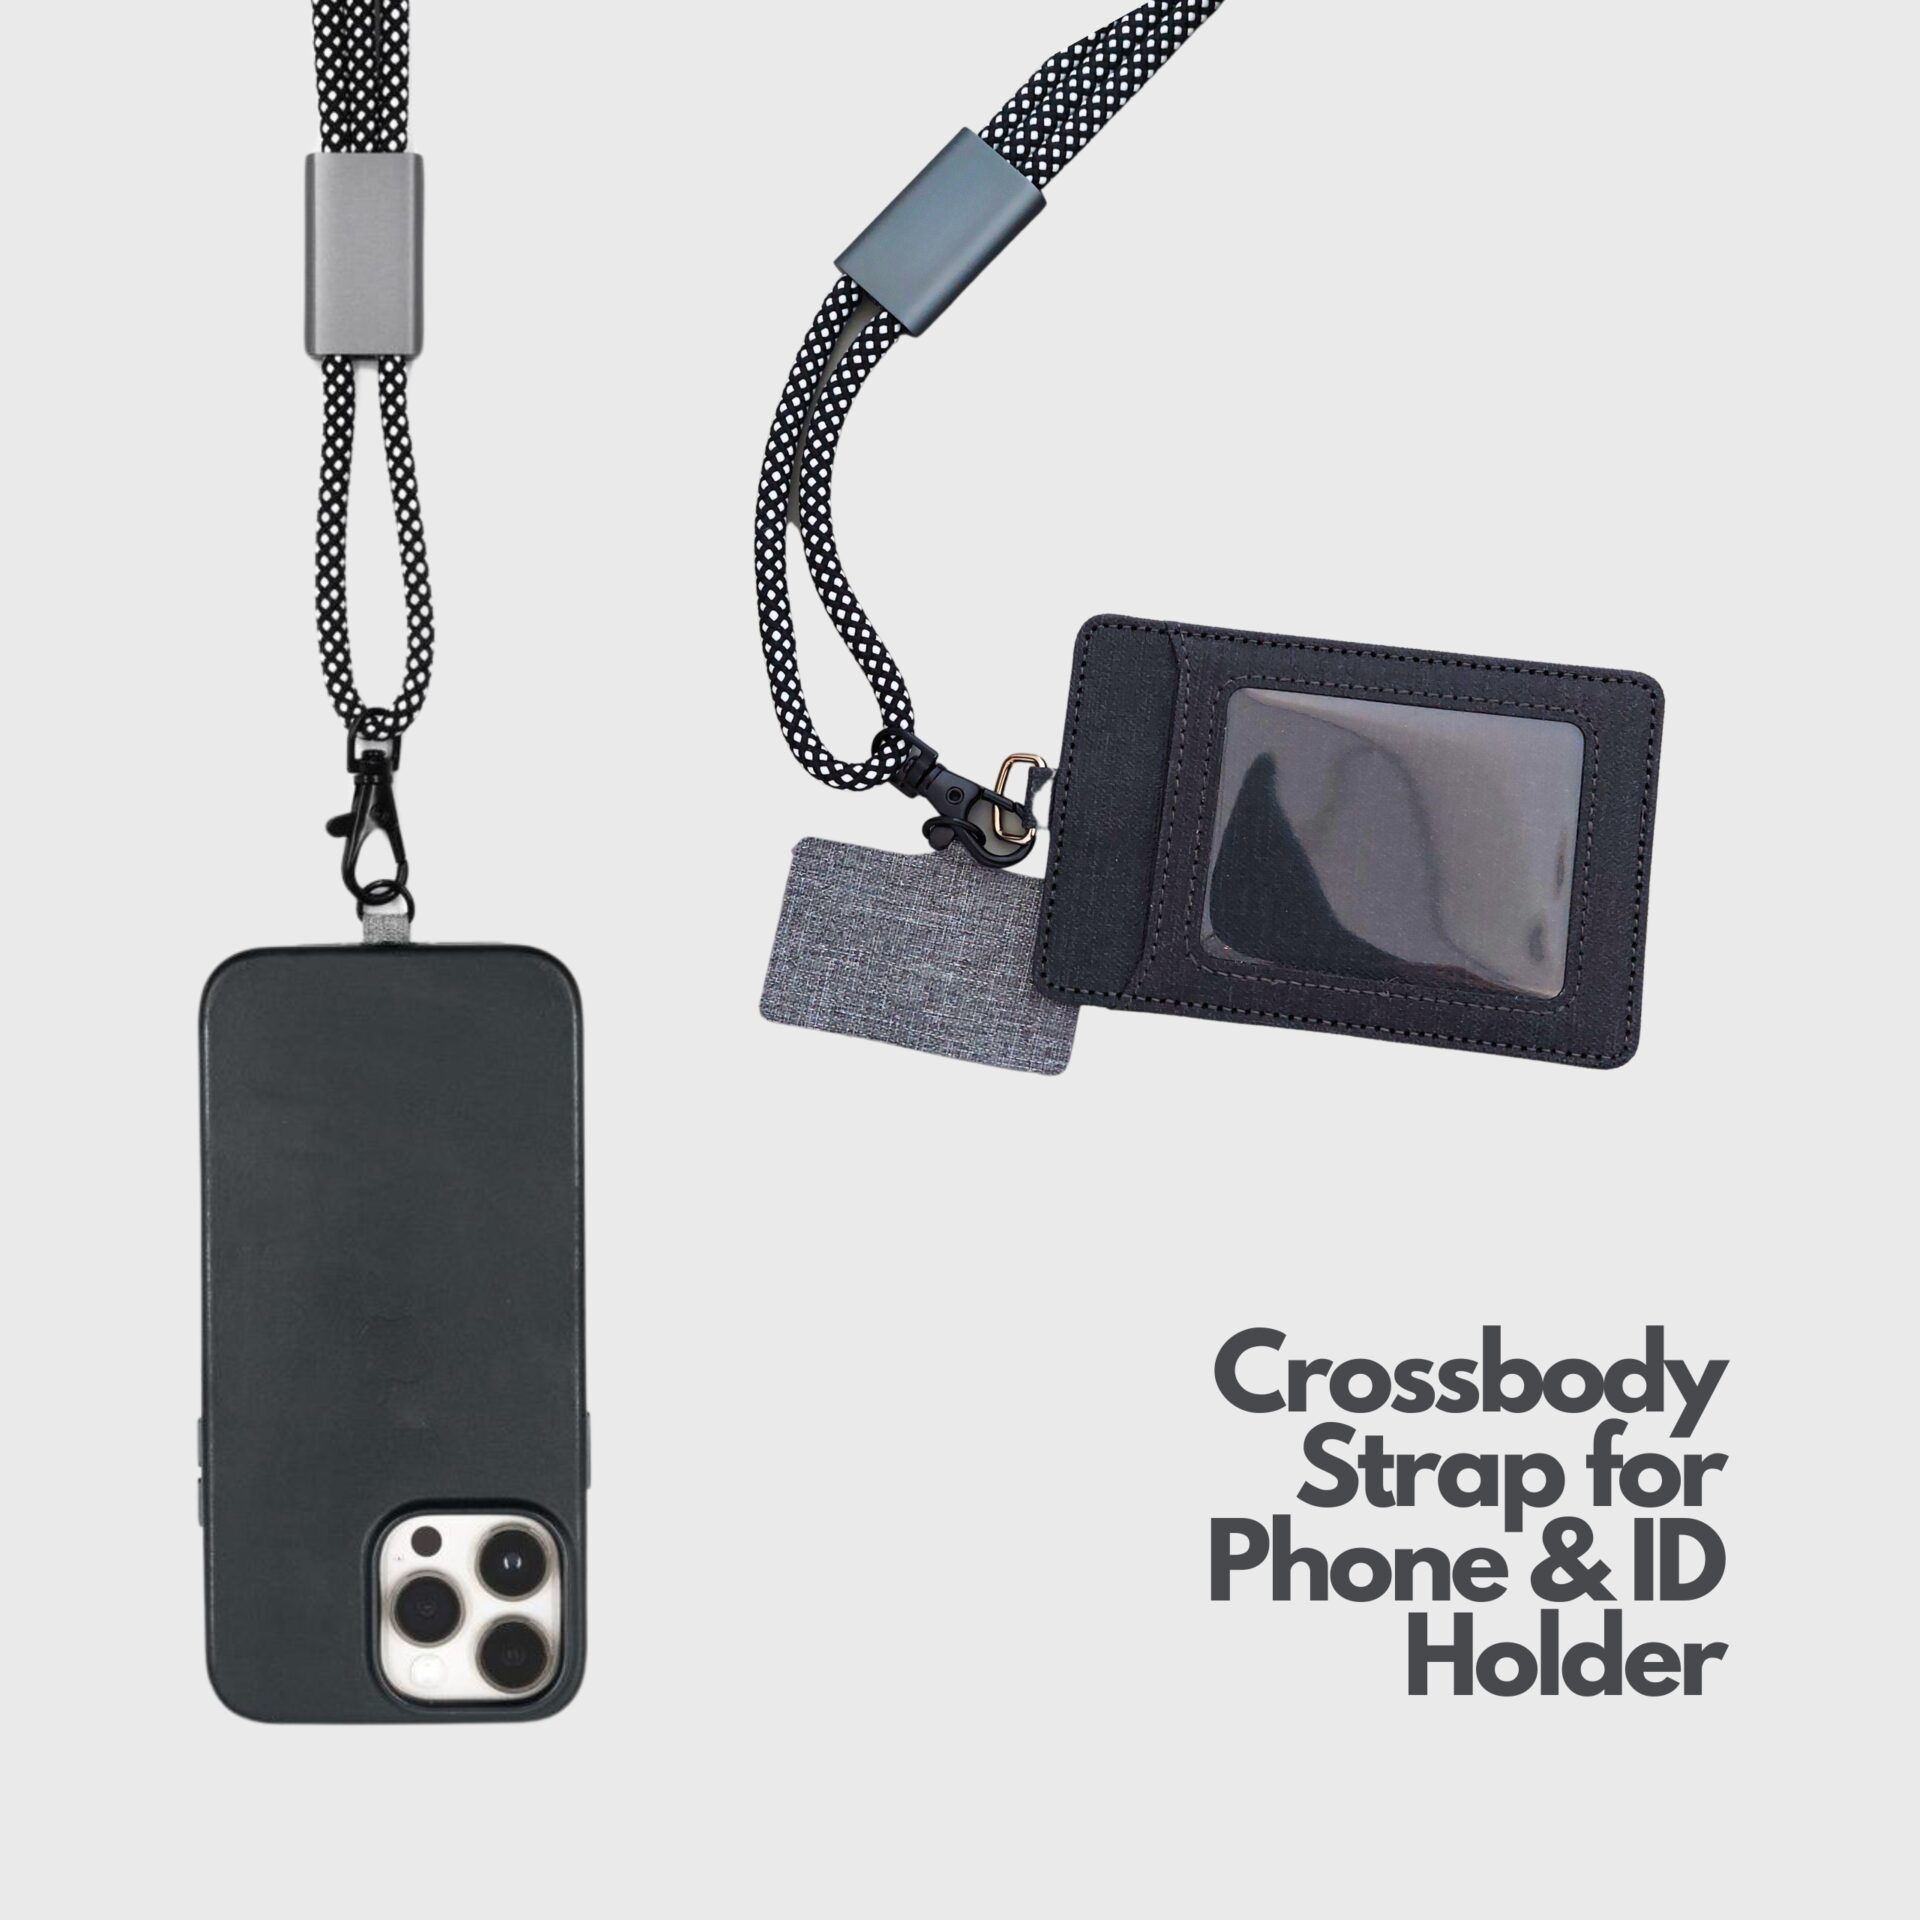 corporate gifts singapore lanyard crossbody strap for phone & ID